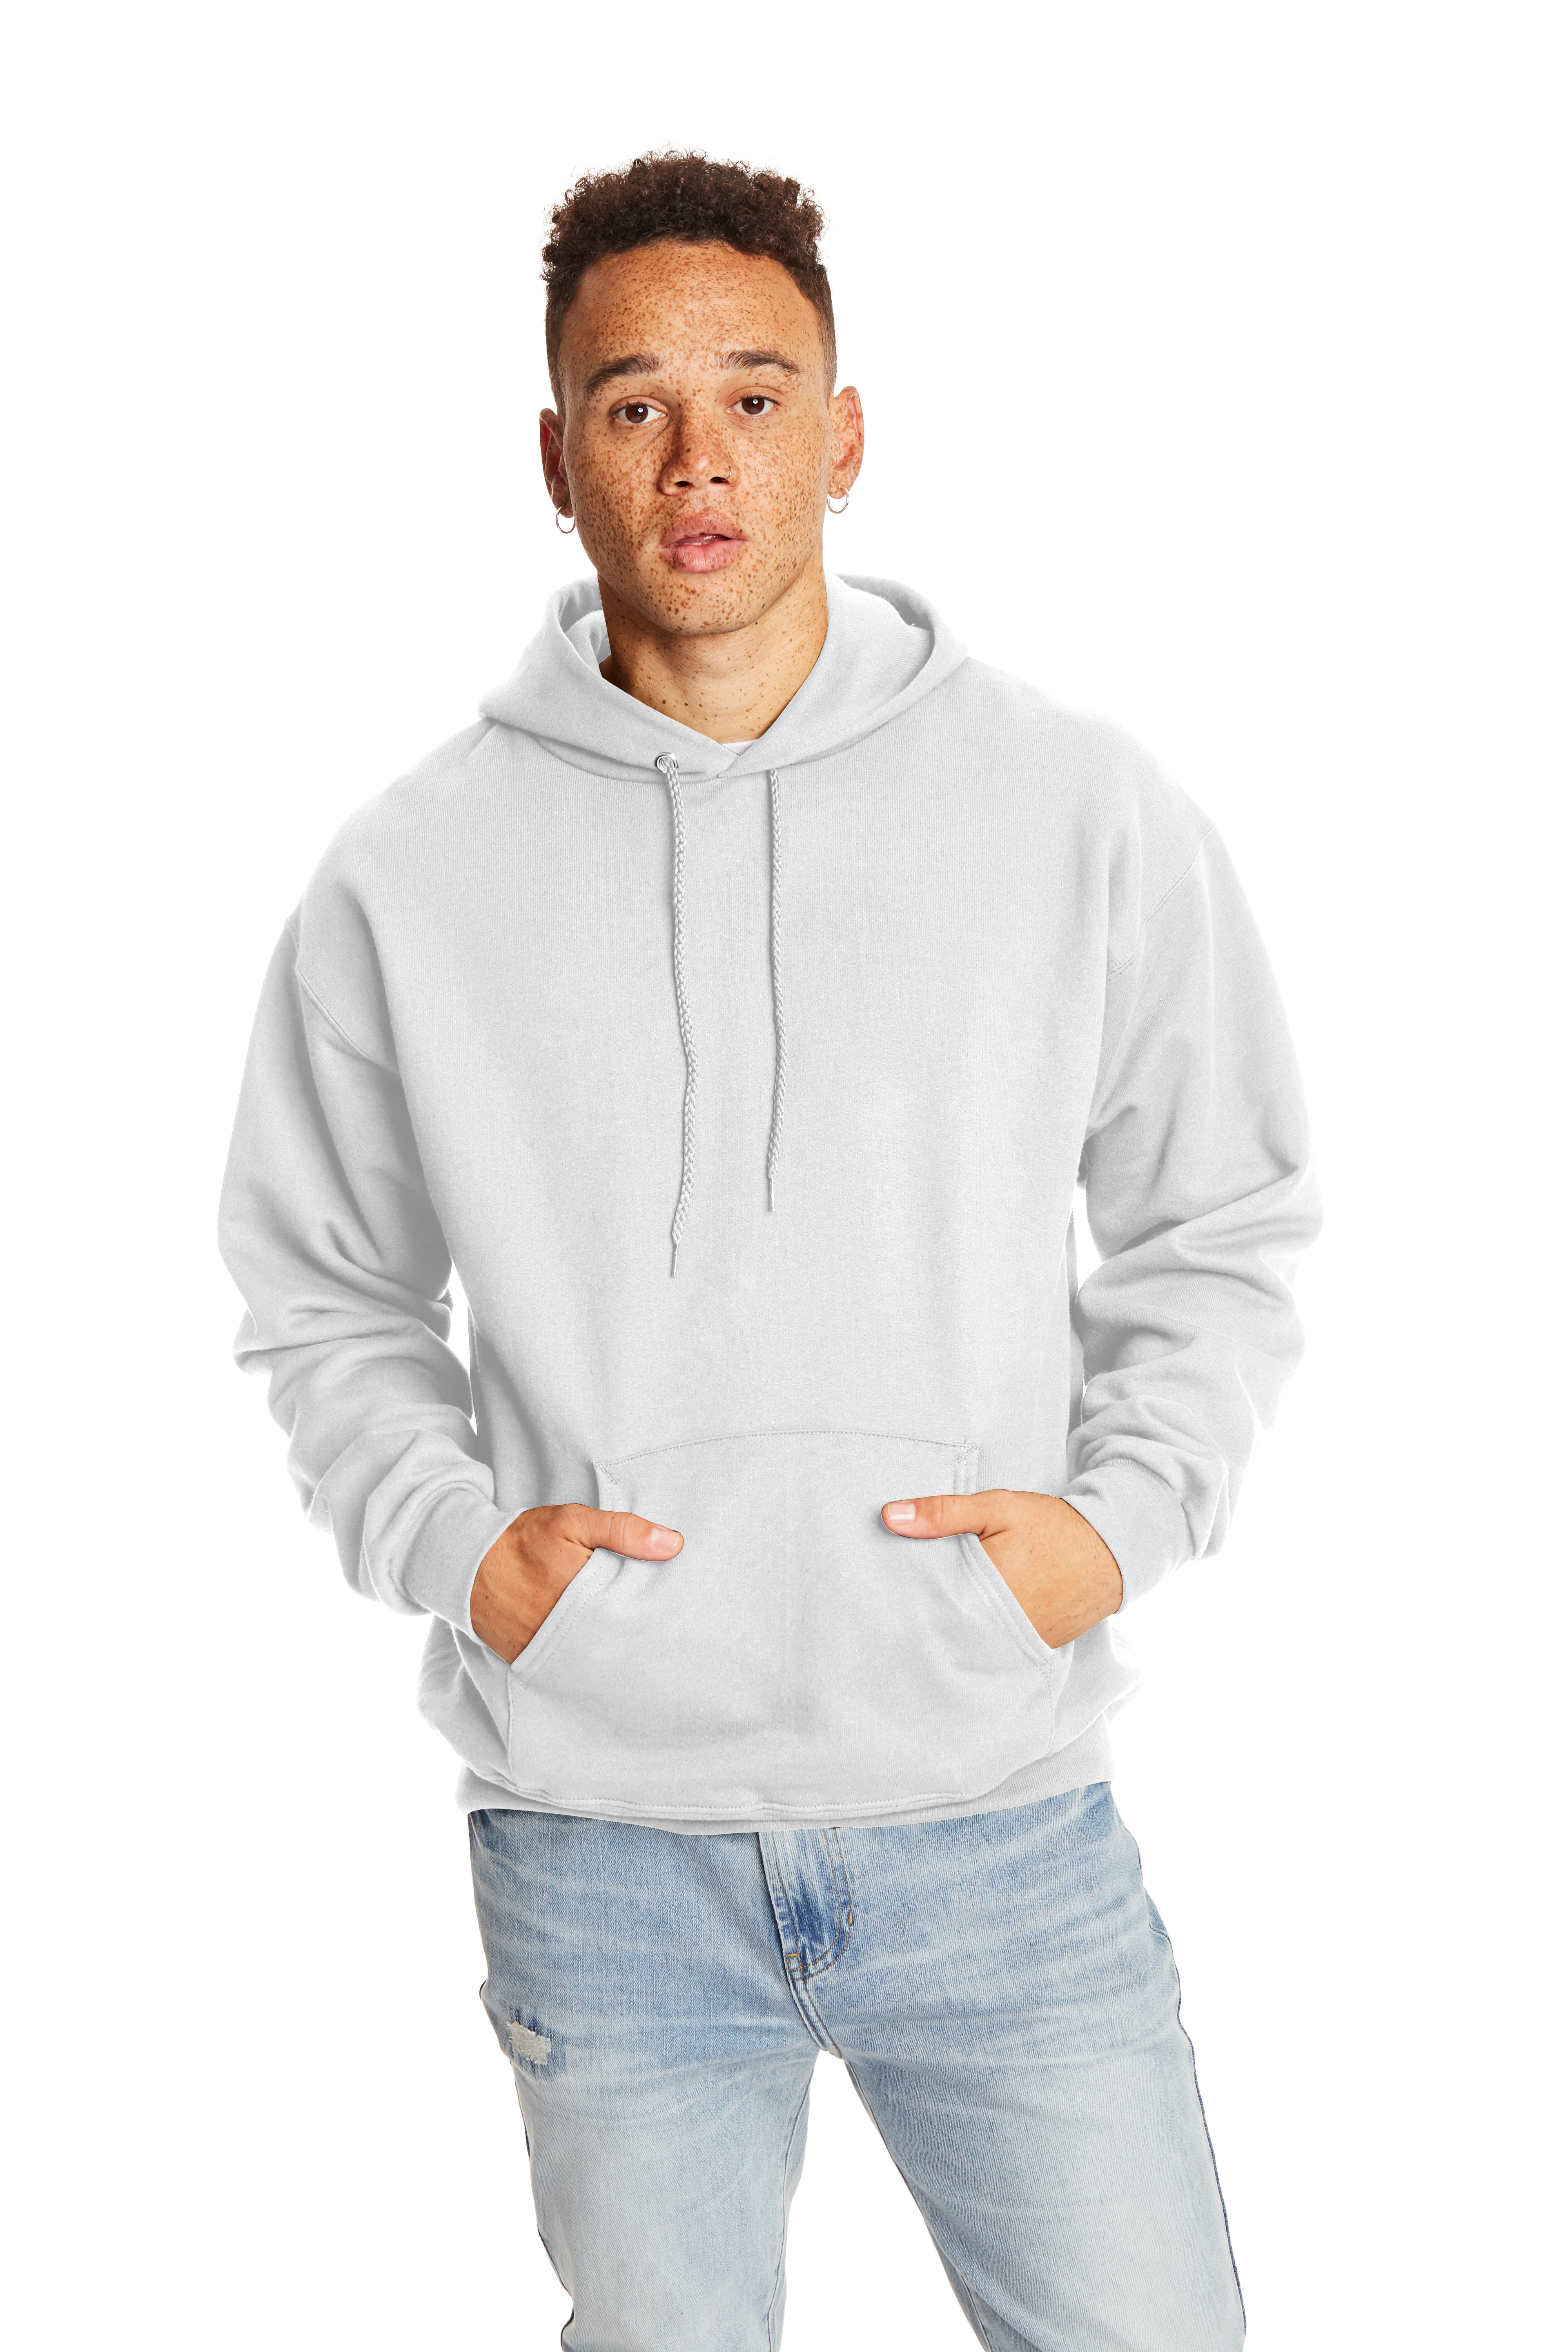 Hanes Ultimate Cotton® 90/10 Pullover Hoodie F170 White | Jiffy